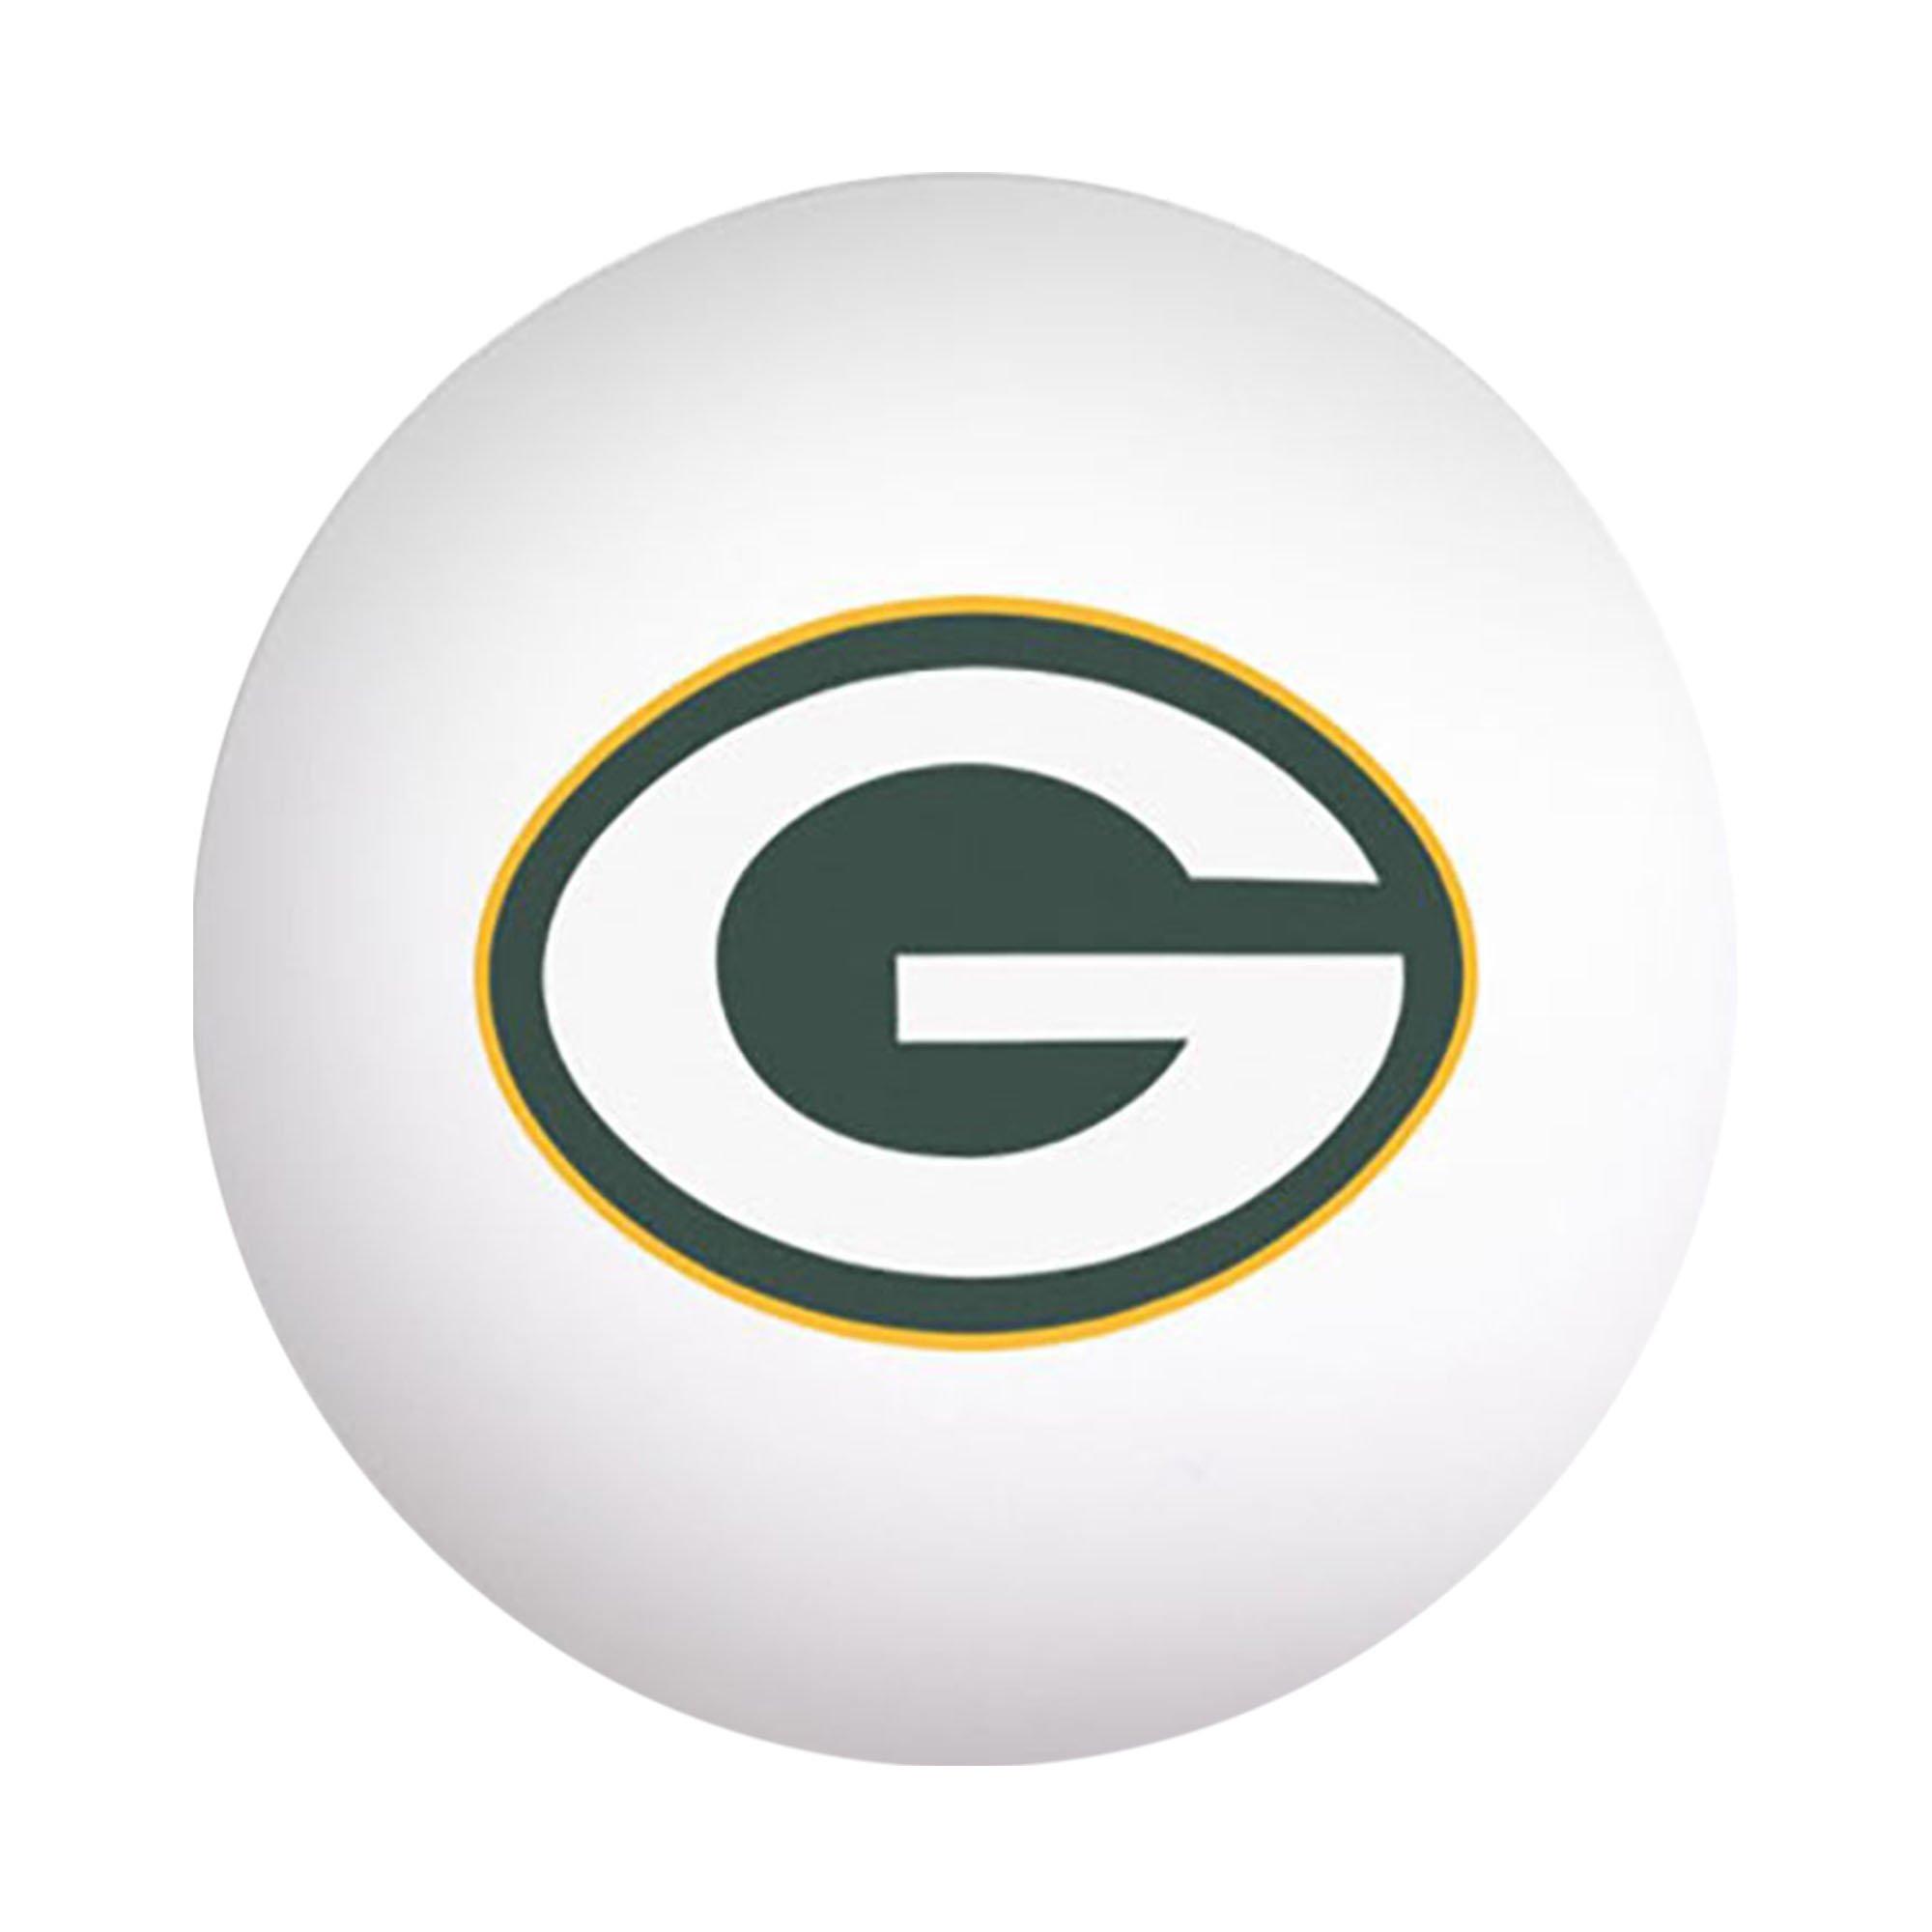 Green Bay Packers Table Tennis Balls, 6ct